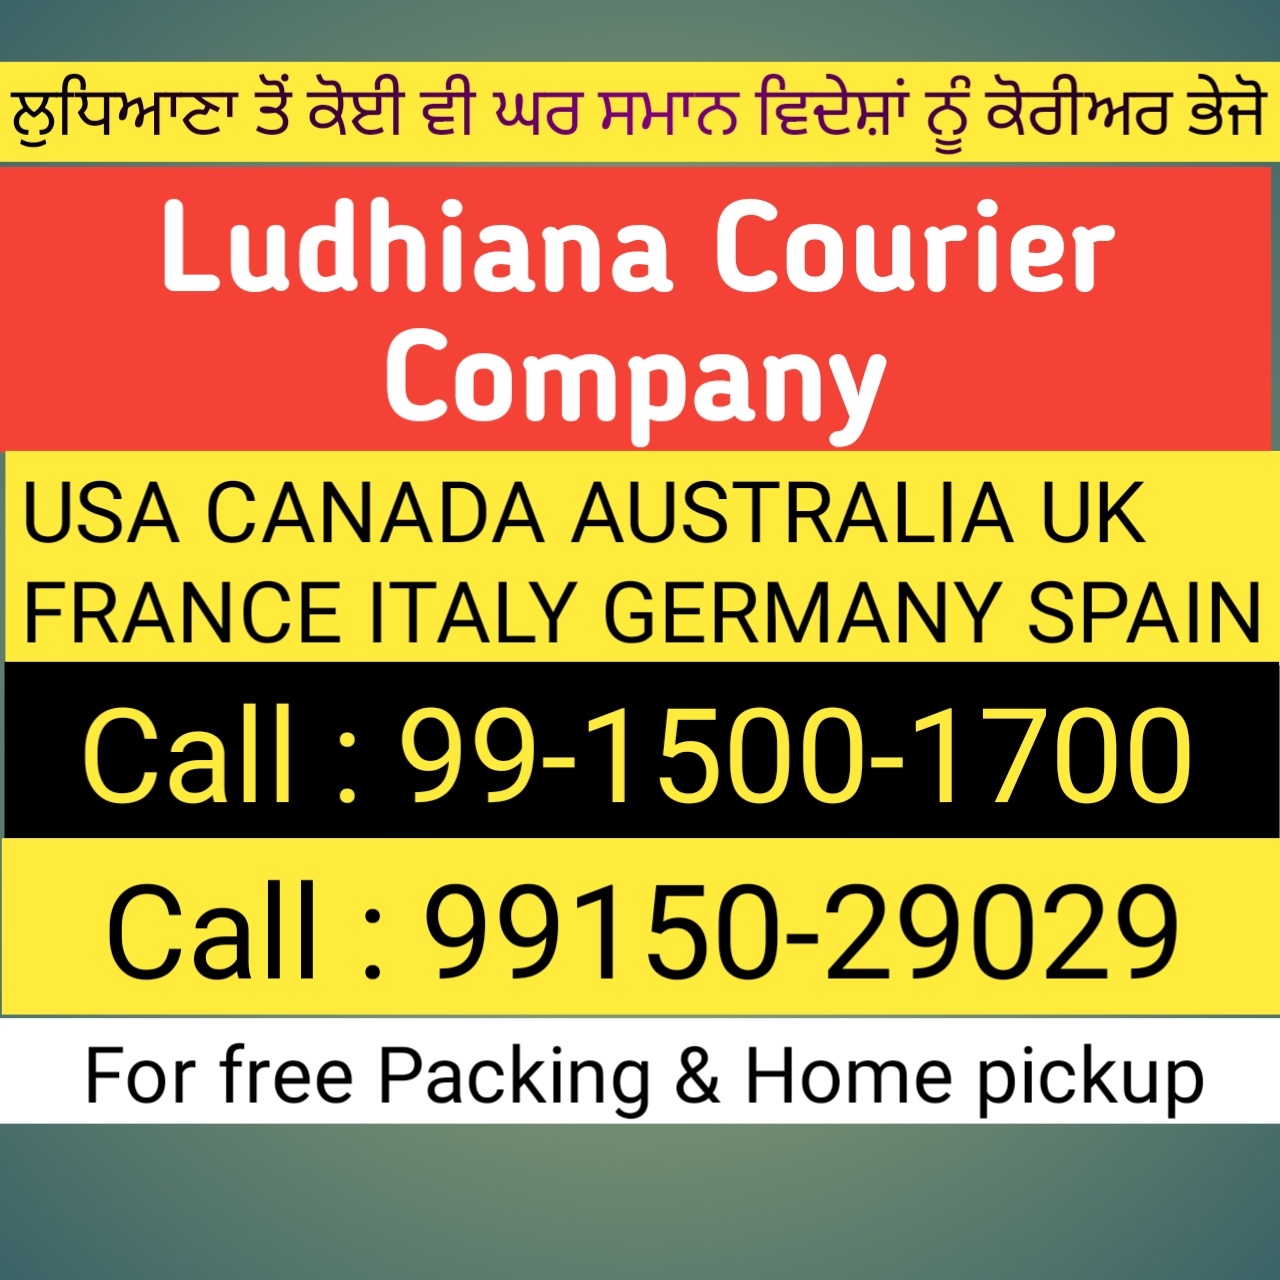 call 99150-29029 Courier from Ludhiana to UK, Canada, USA, Australia, Singapore, New Zealand, Canada, Germany, France, Europe And Africa